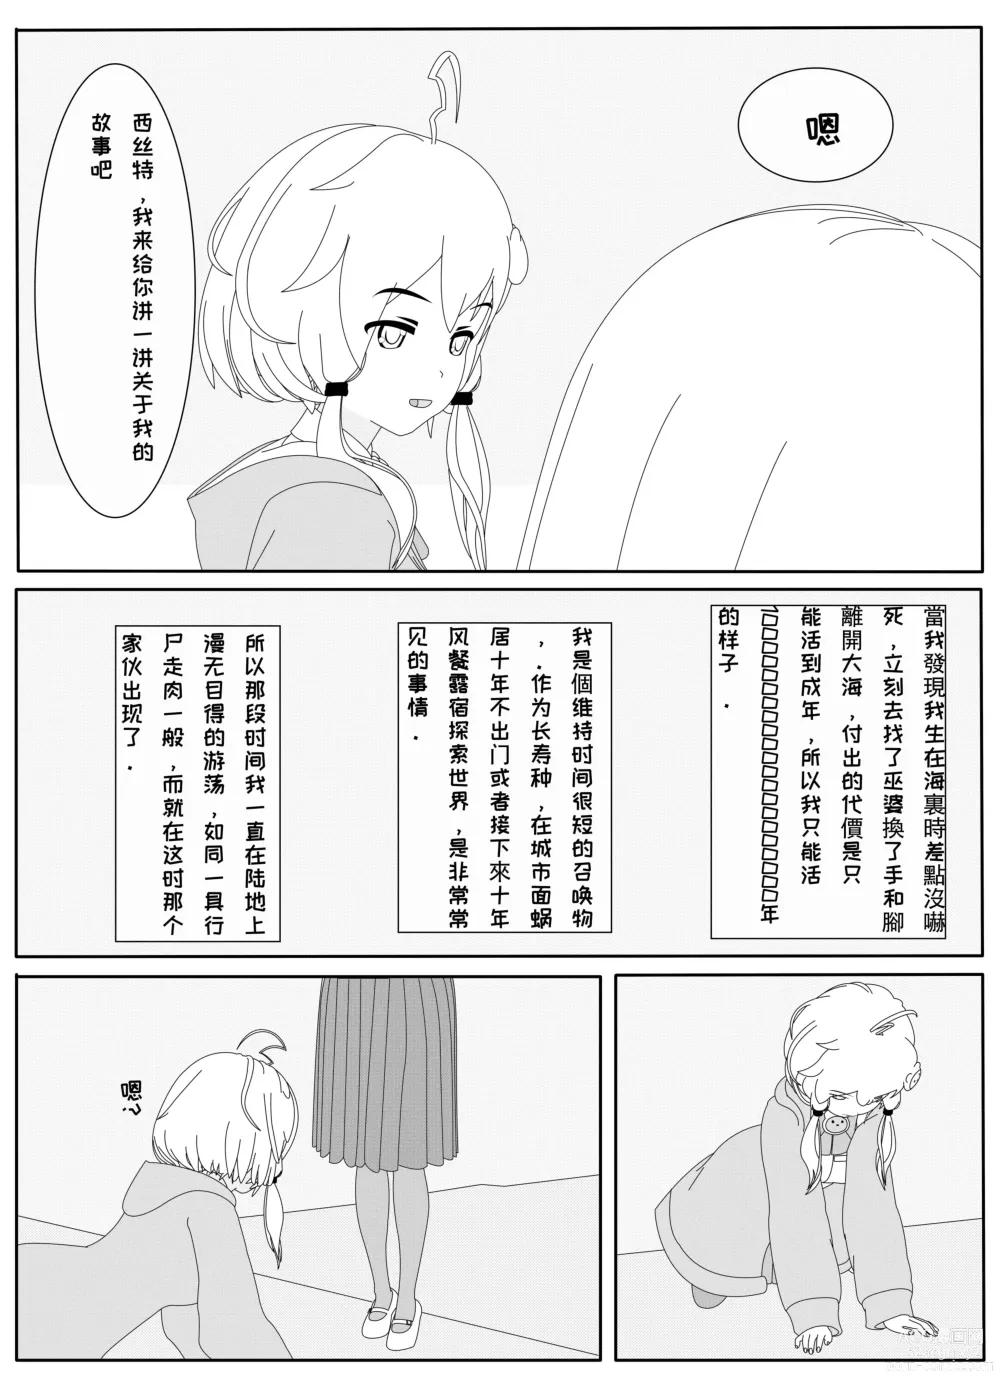 Page 10 of doujinshi 鲸之恋2（西丝特Xether）